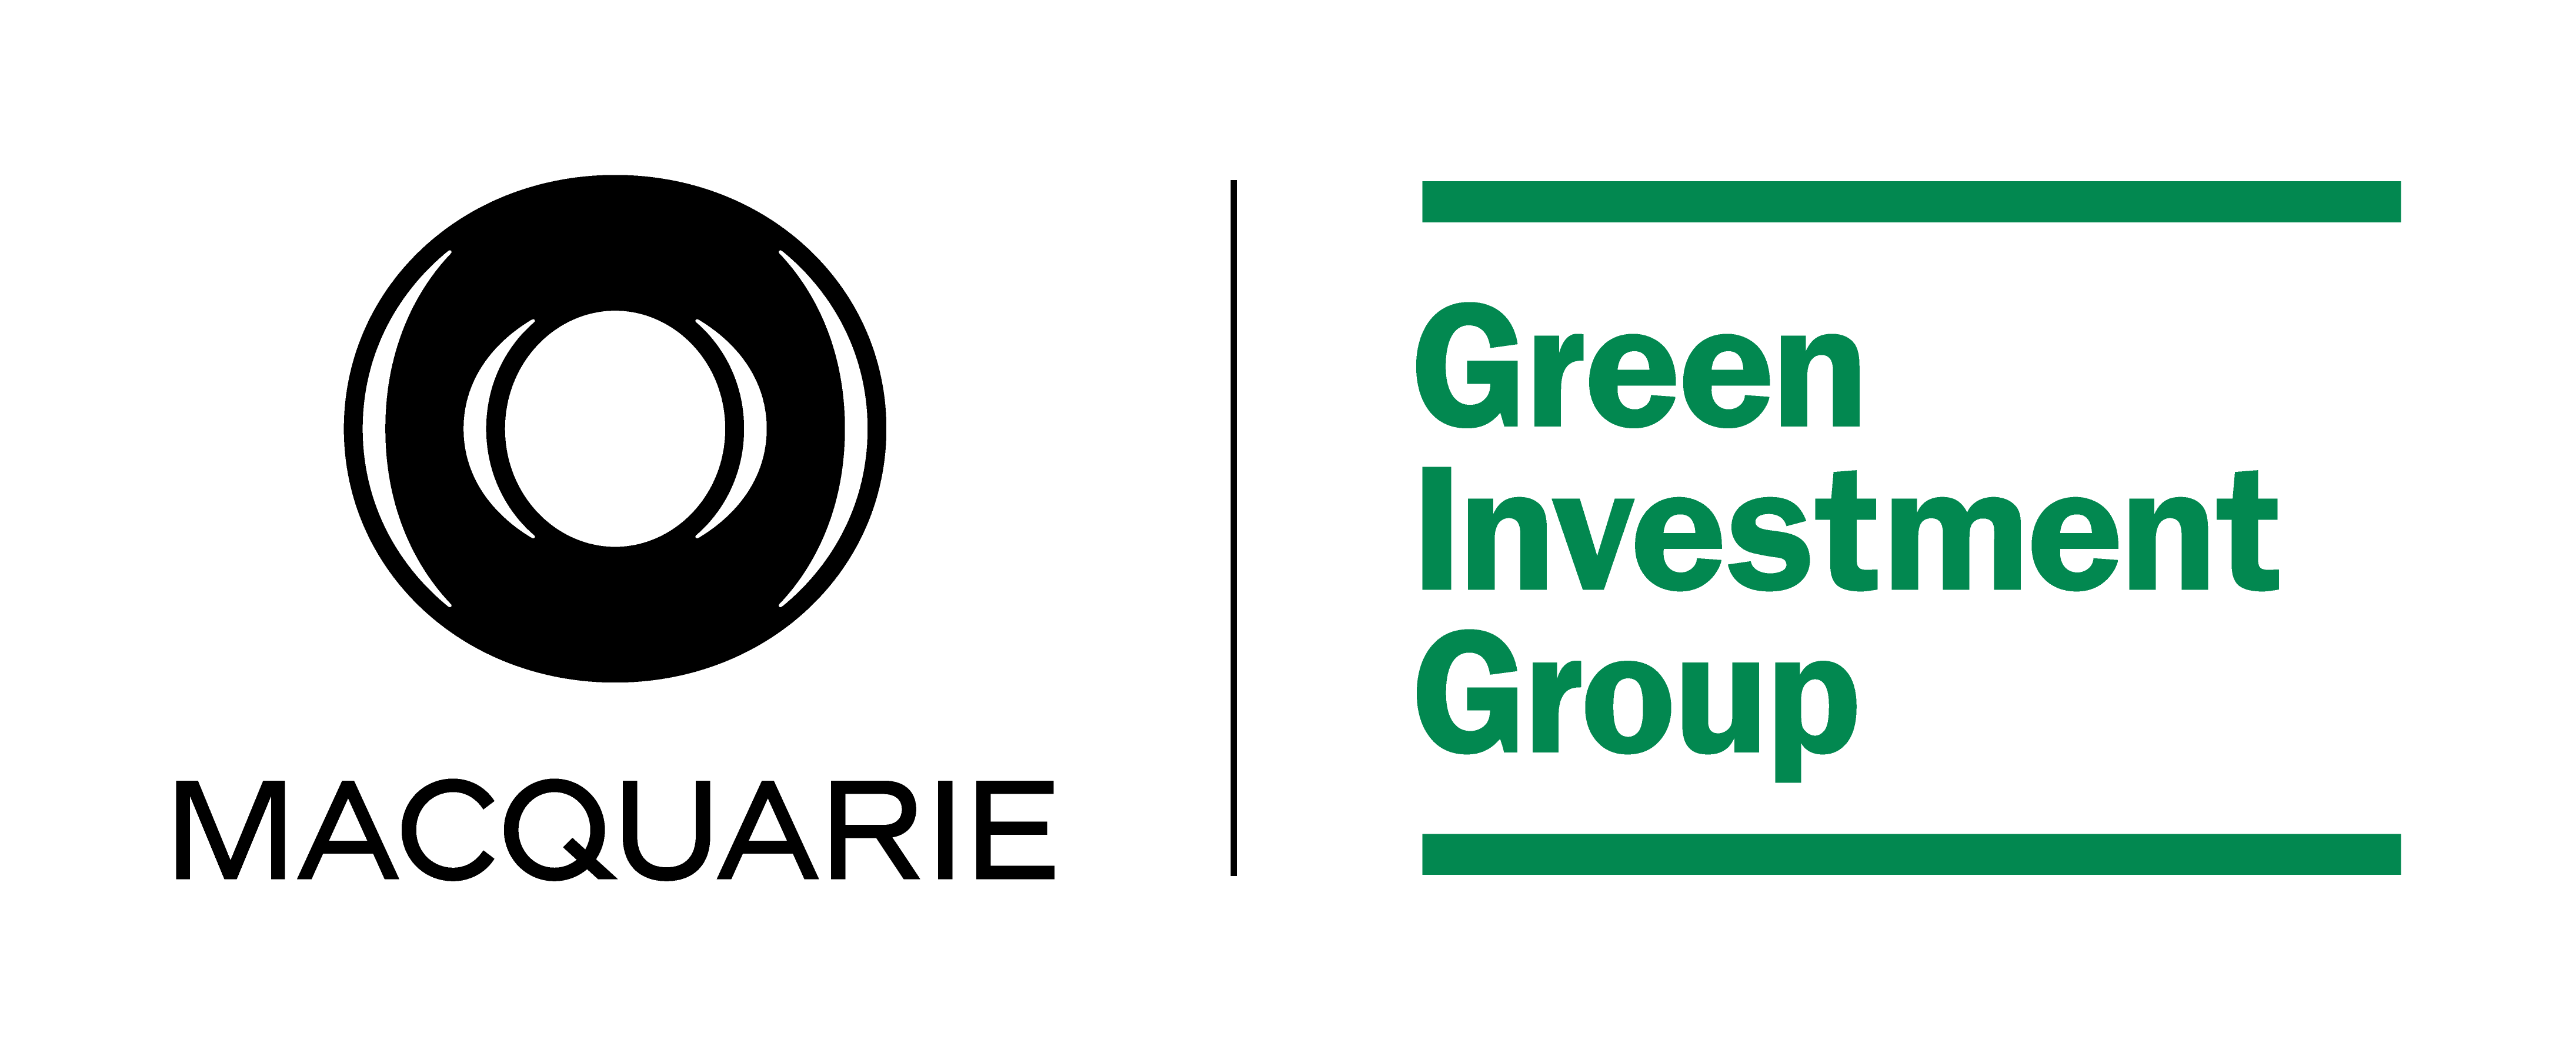 Green Investment Group company logo